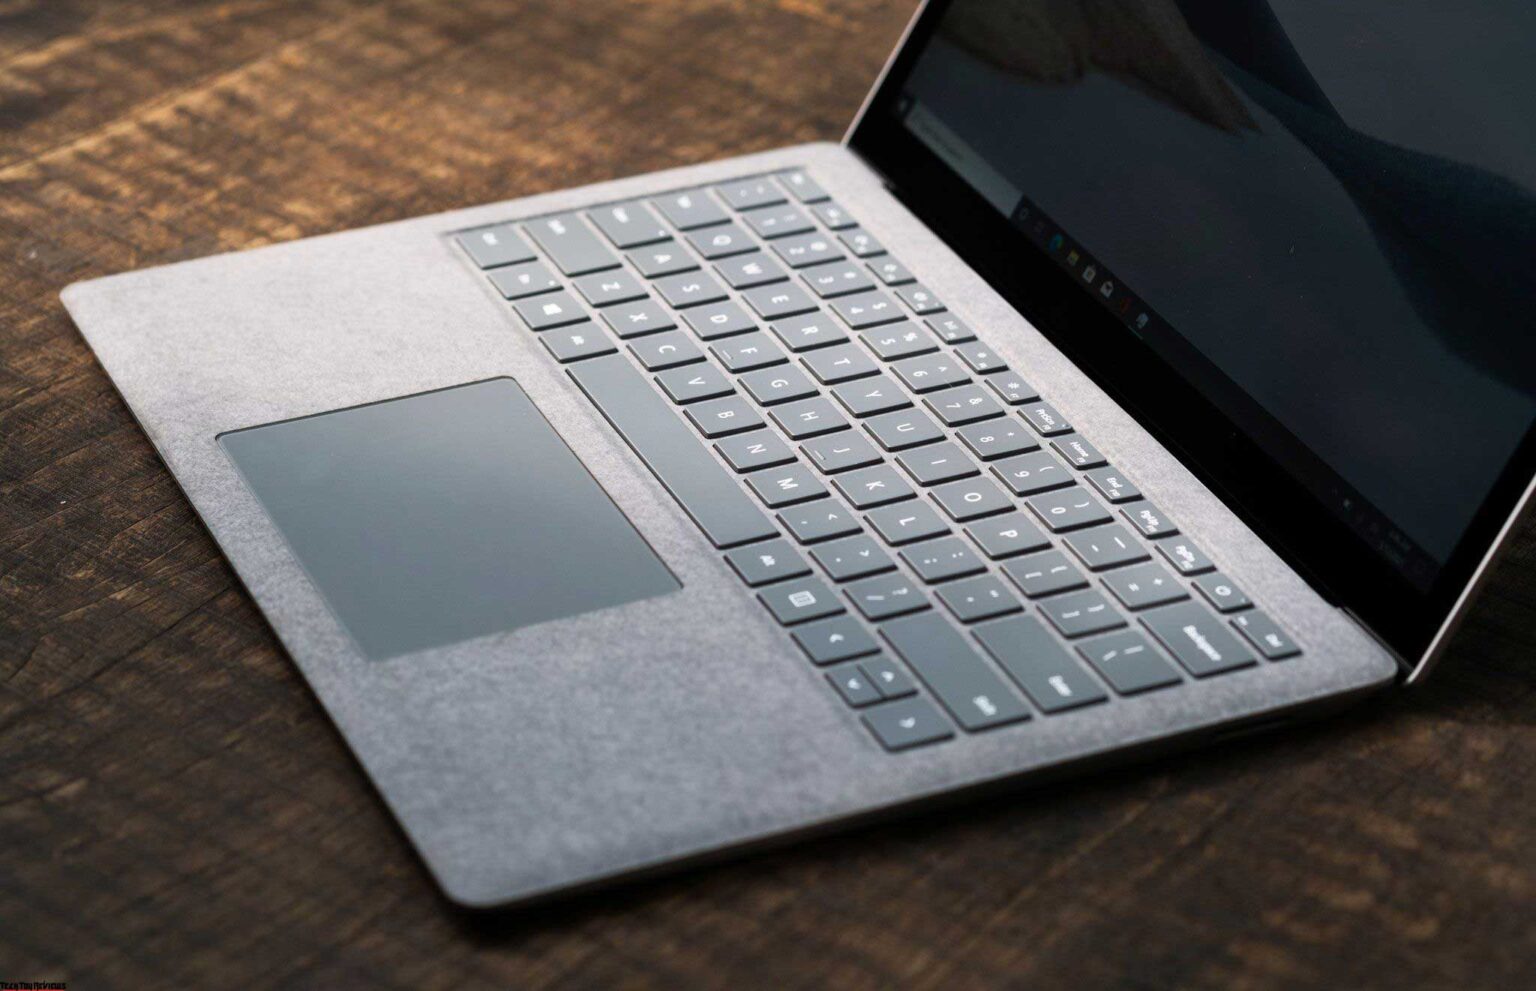 surface laptop 4 release date